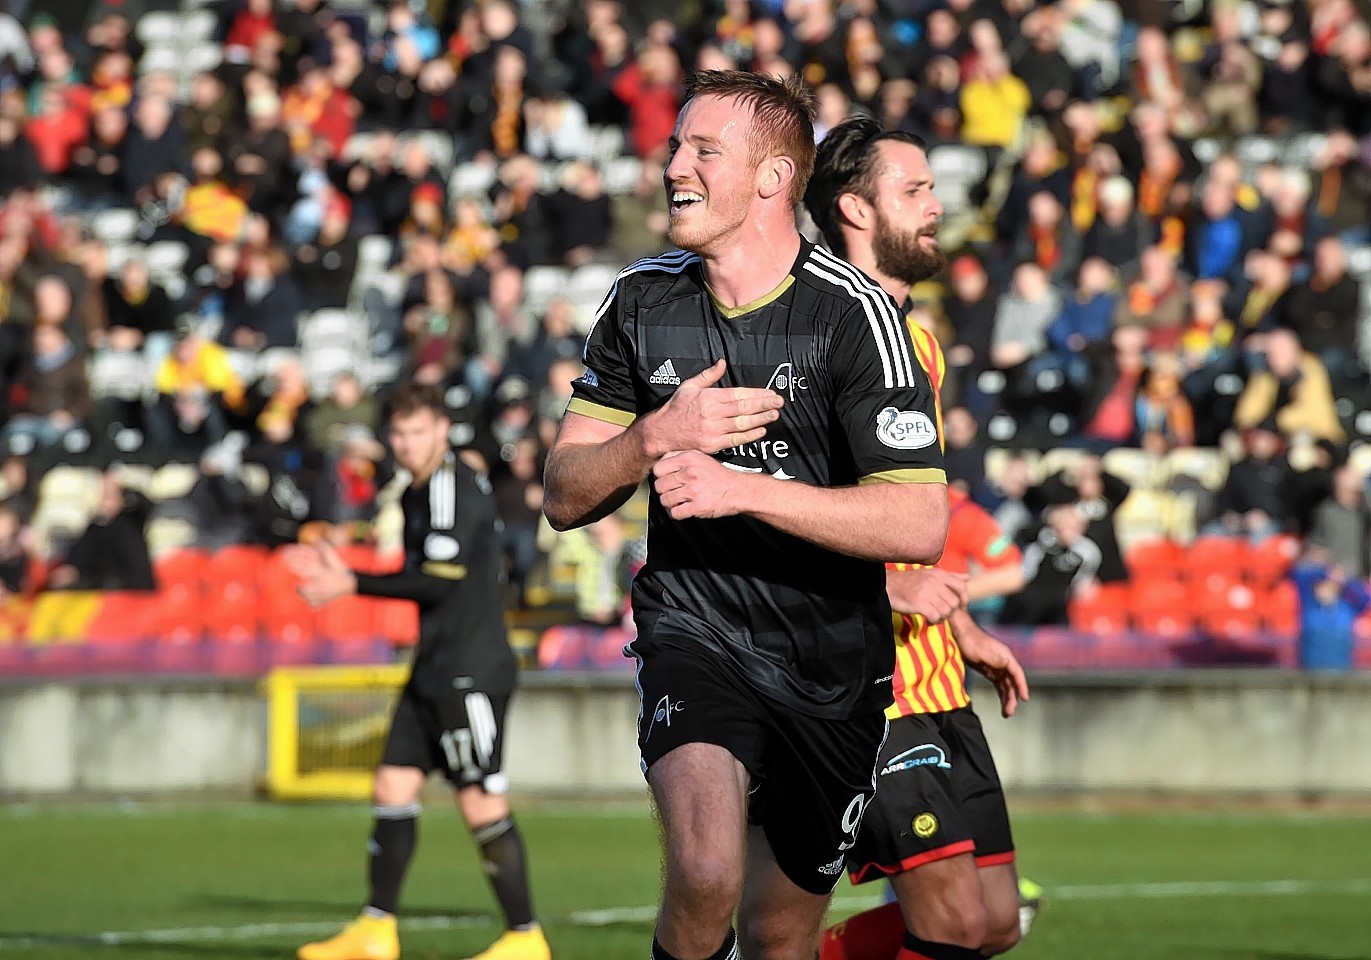 Adam Rooney joined the Dons at this time last season